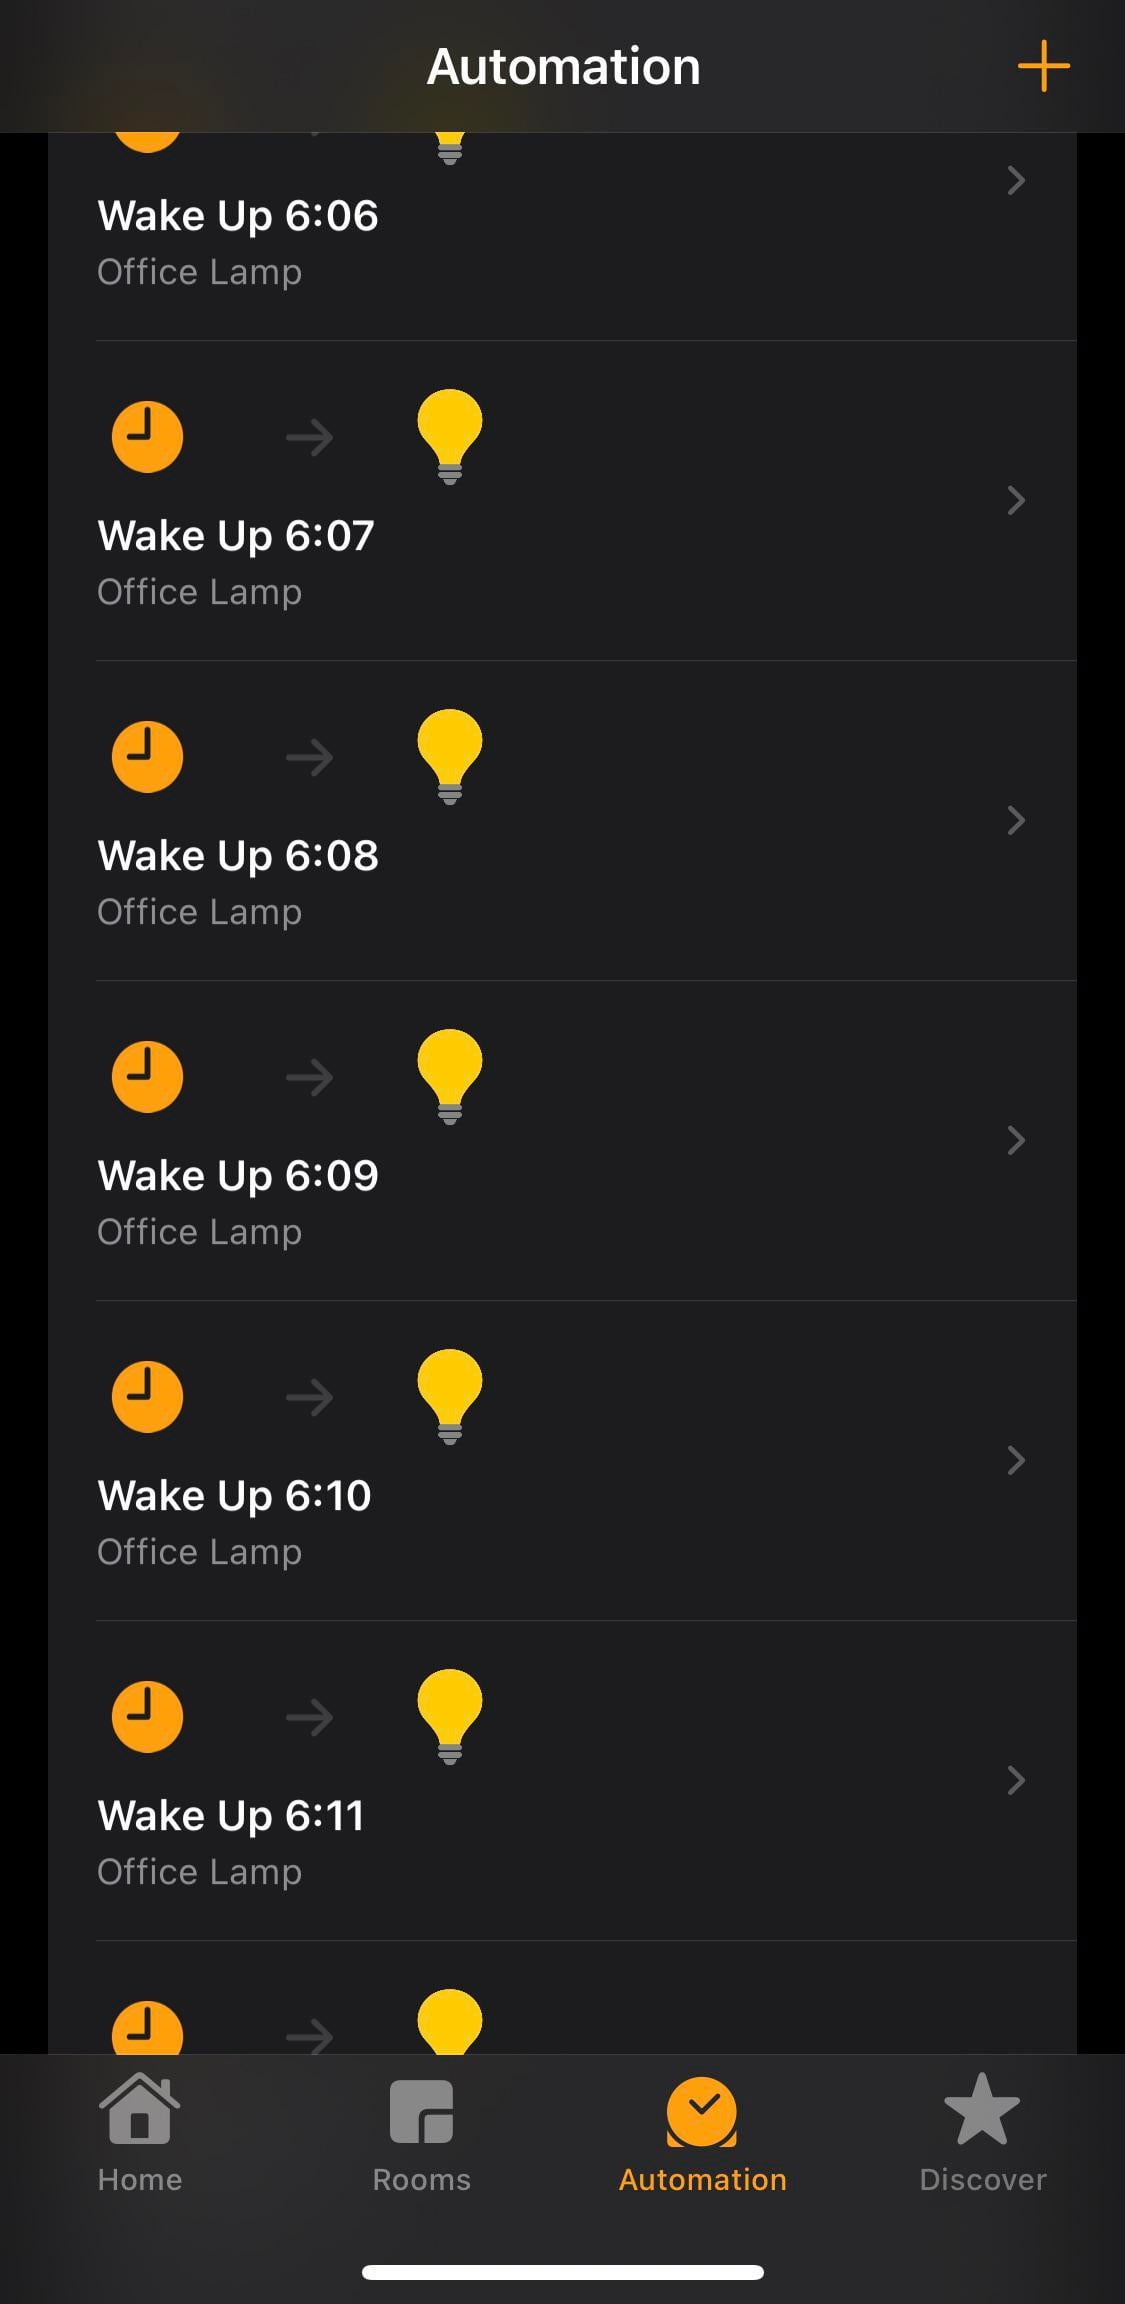 Sunrise Alarm Automation is there a better way to do